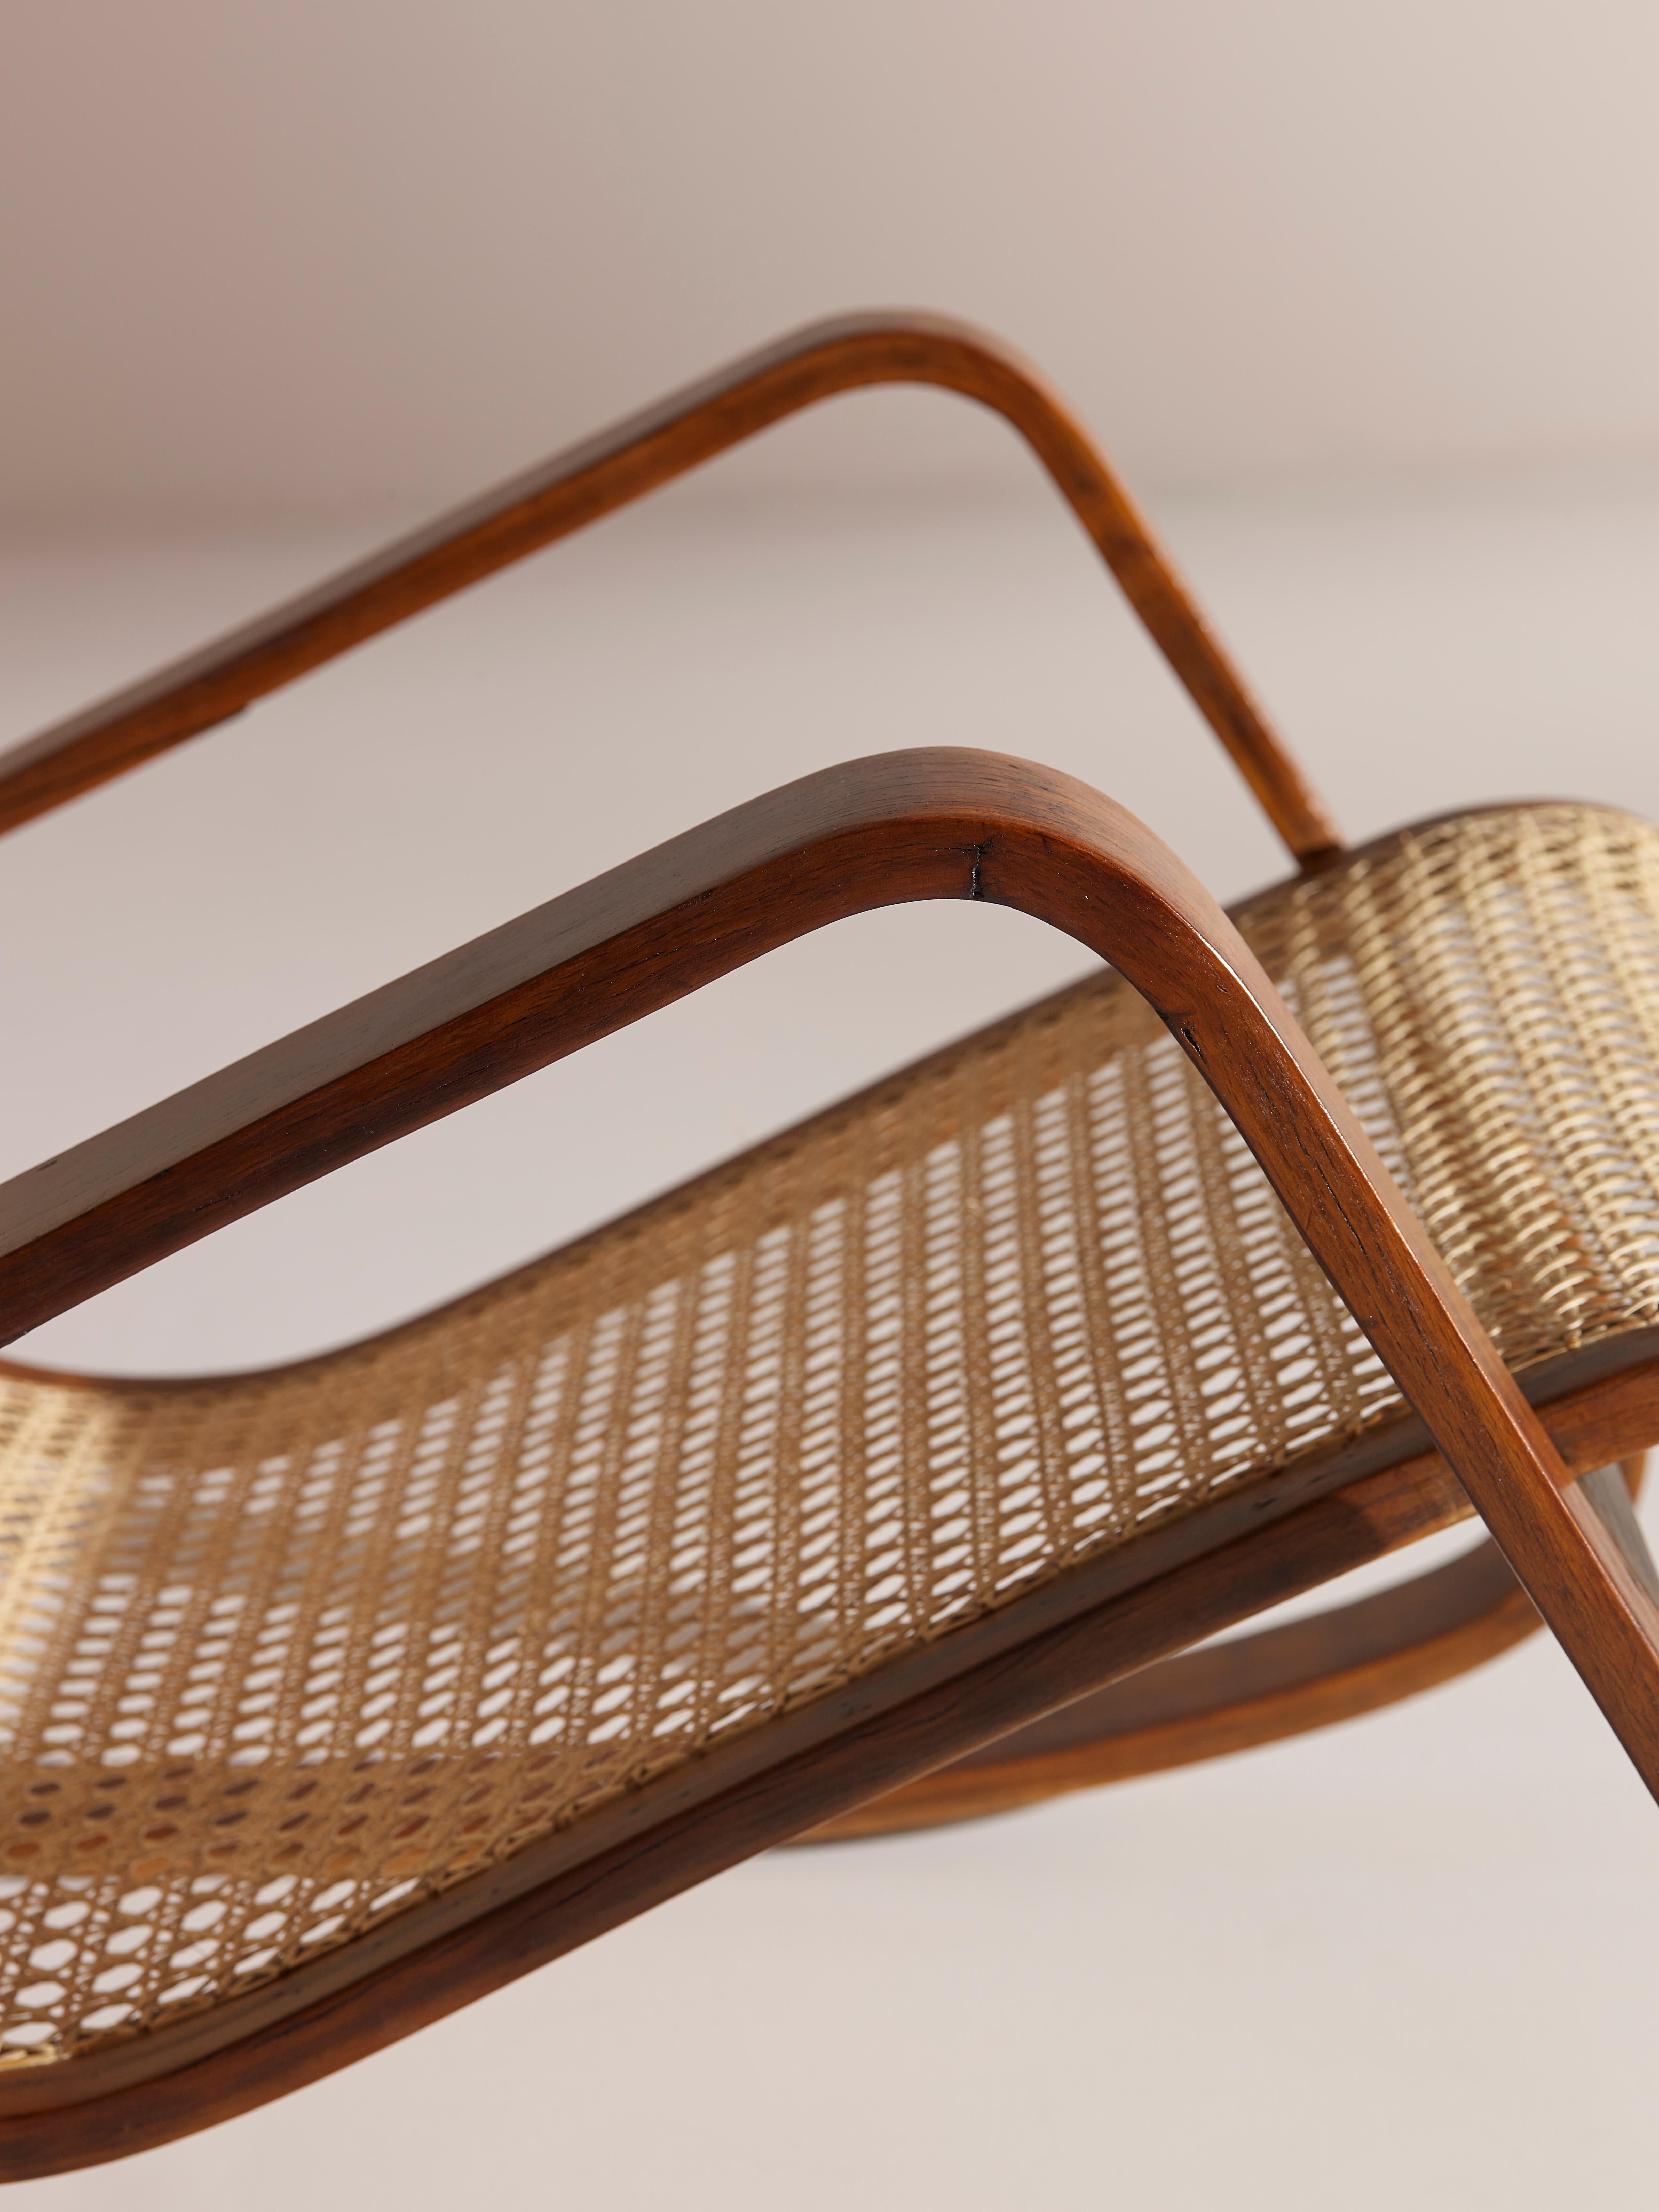 Italian Caned Rocking Chair Made by Porino, Italy, 1930s